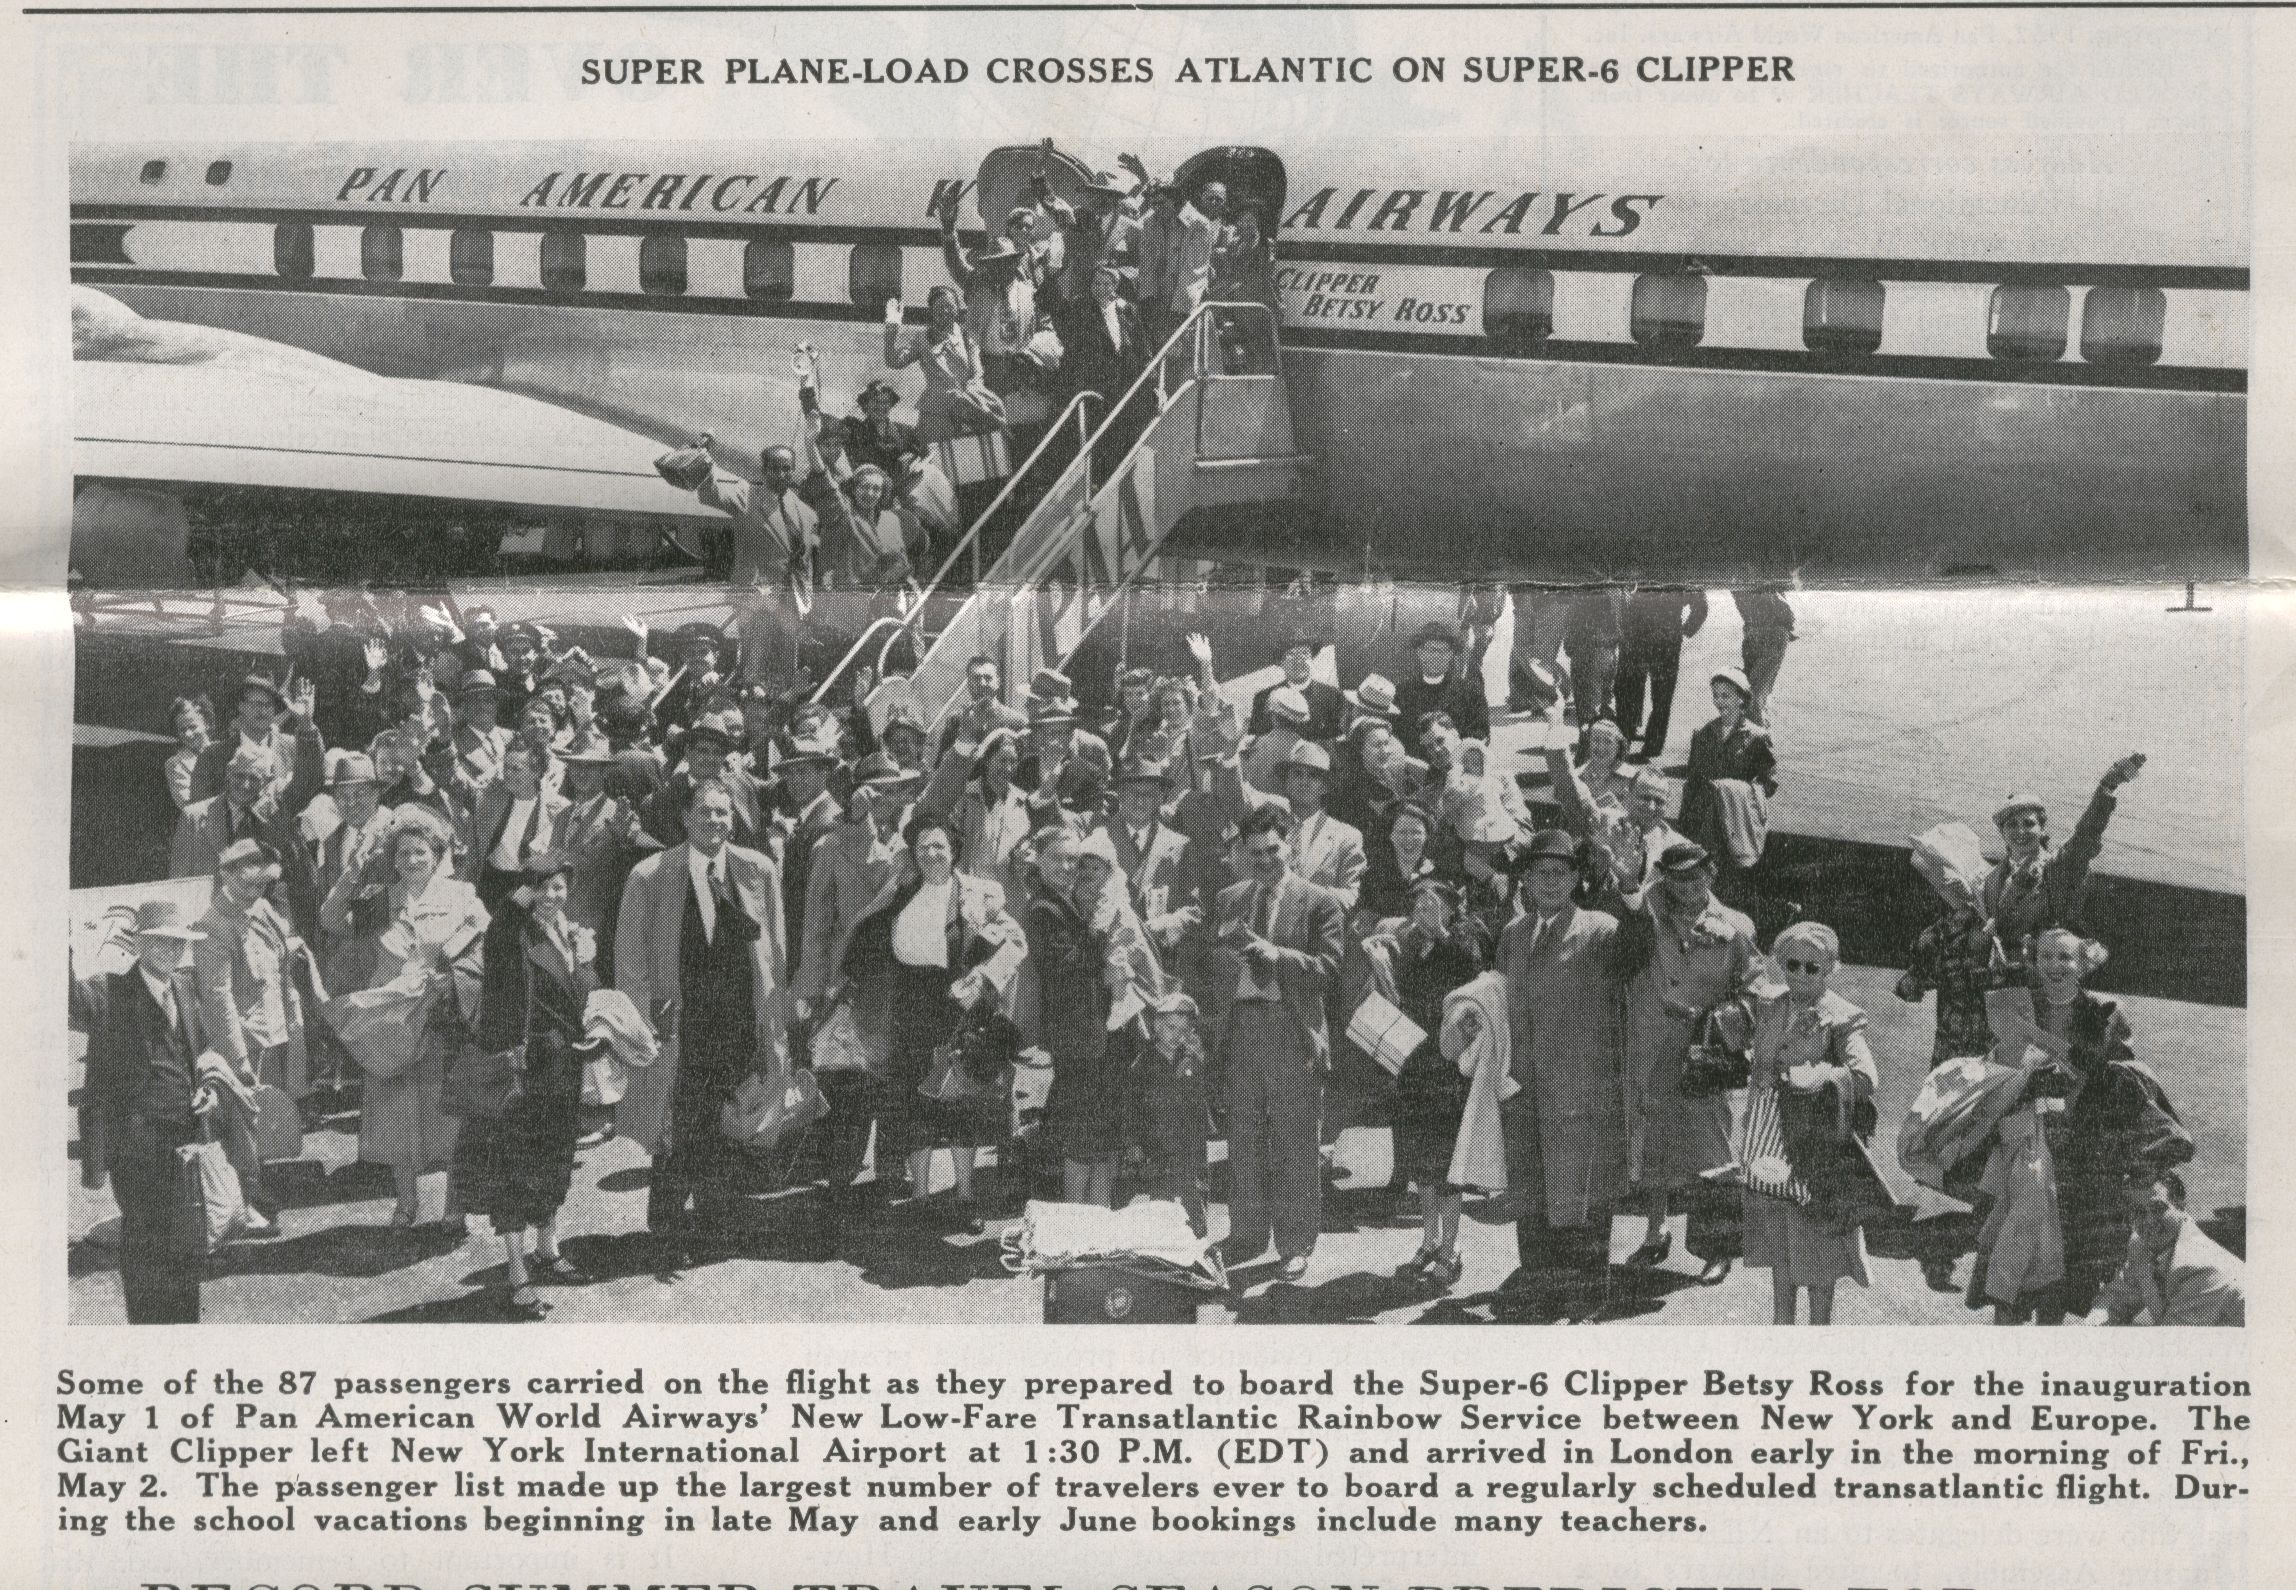 1952 Customers pose prior to Pan Am's first Economy Class flight.